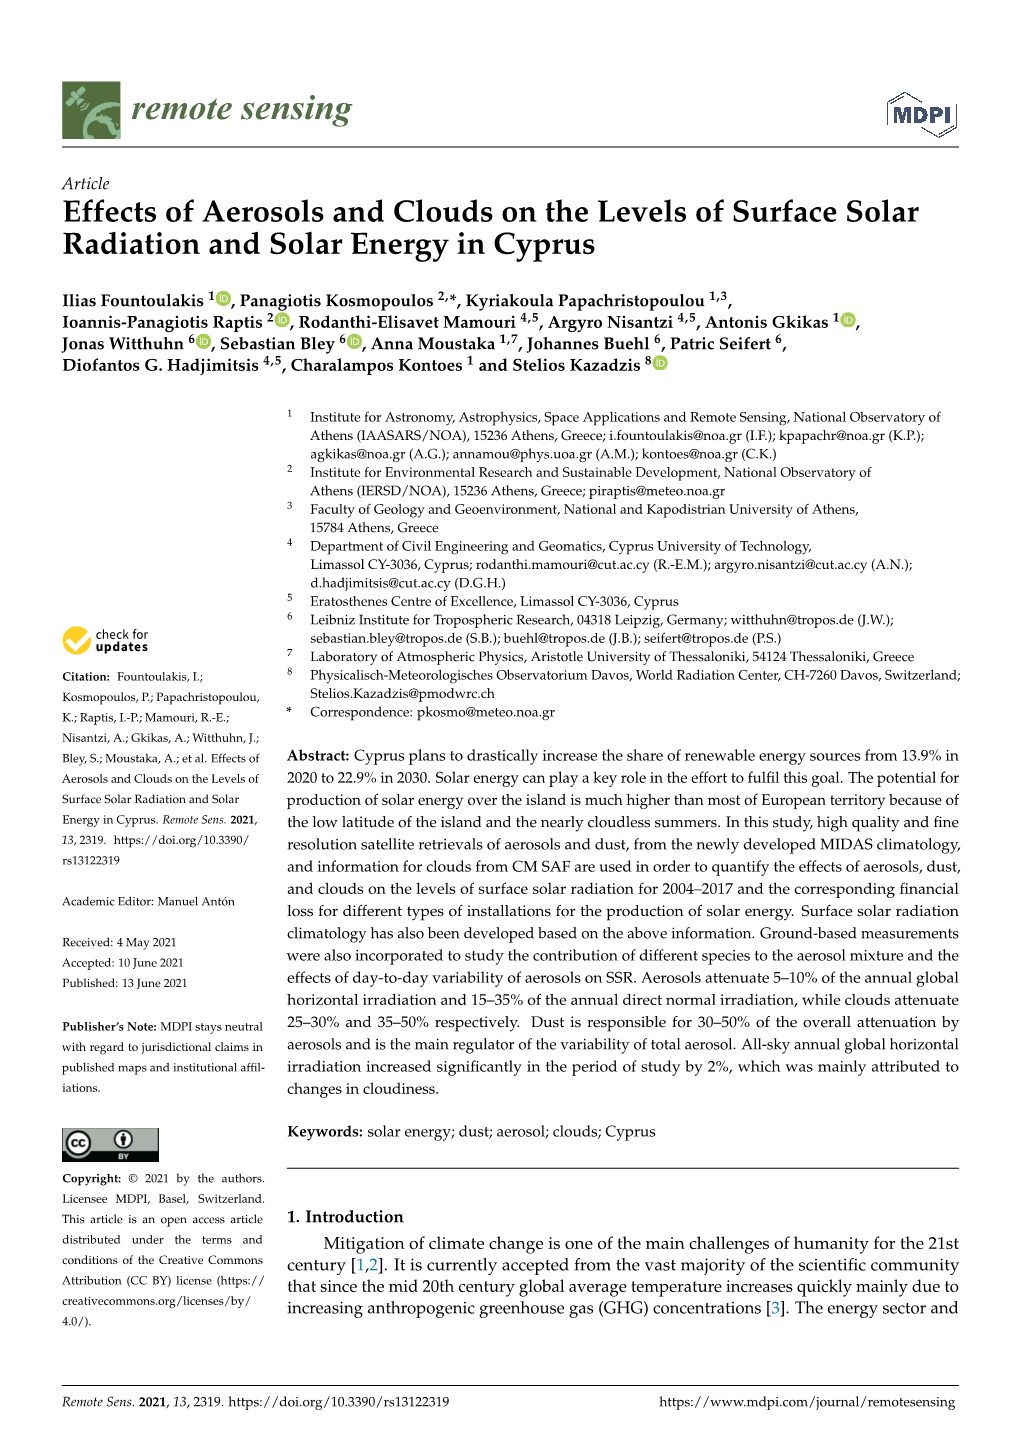 Effects of Aerosols and Clouds on the Levels of Surface Solar Radiation and Solar Energy in Cyprus